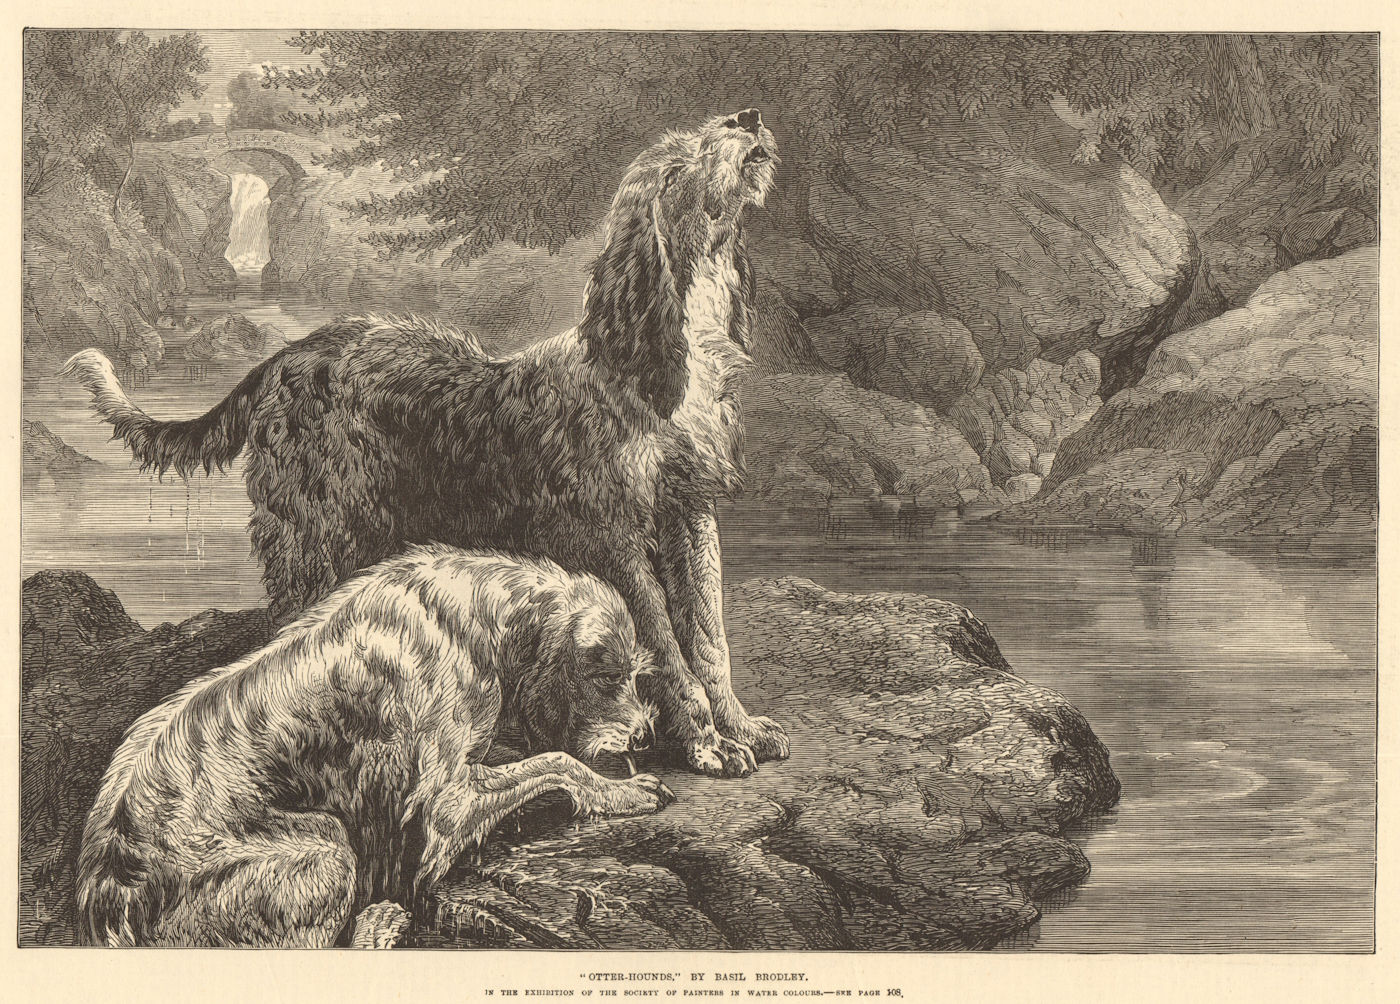 Associate Product "Otter-hounds", by Basil Brodley. Dogs. Fine arts 1872 antique ILN full page